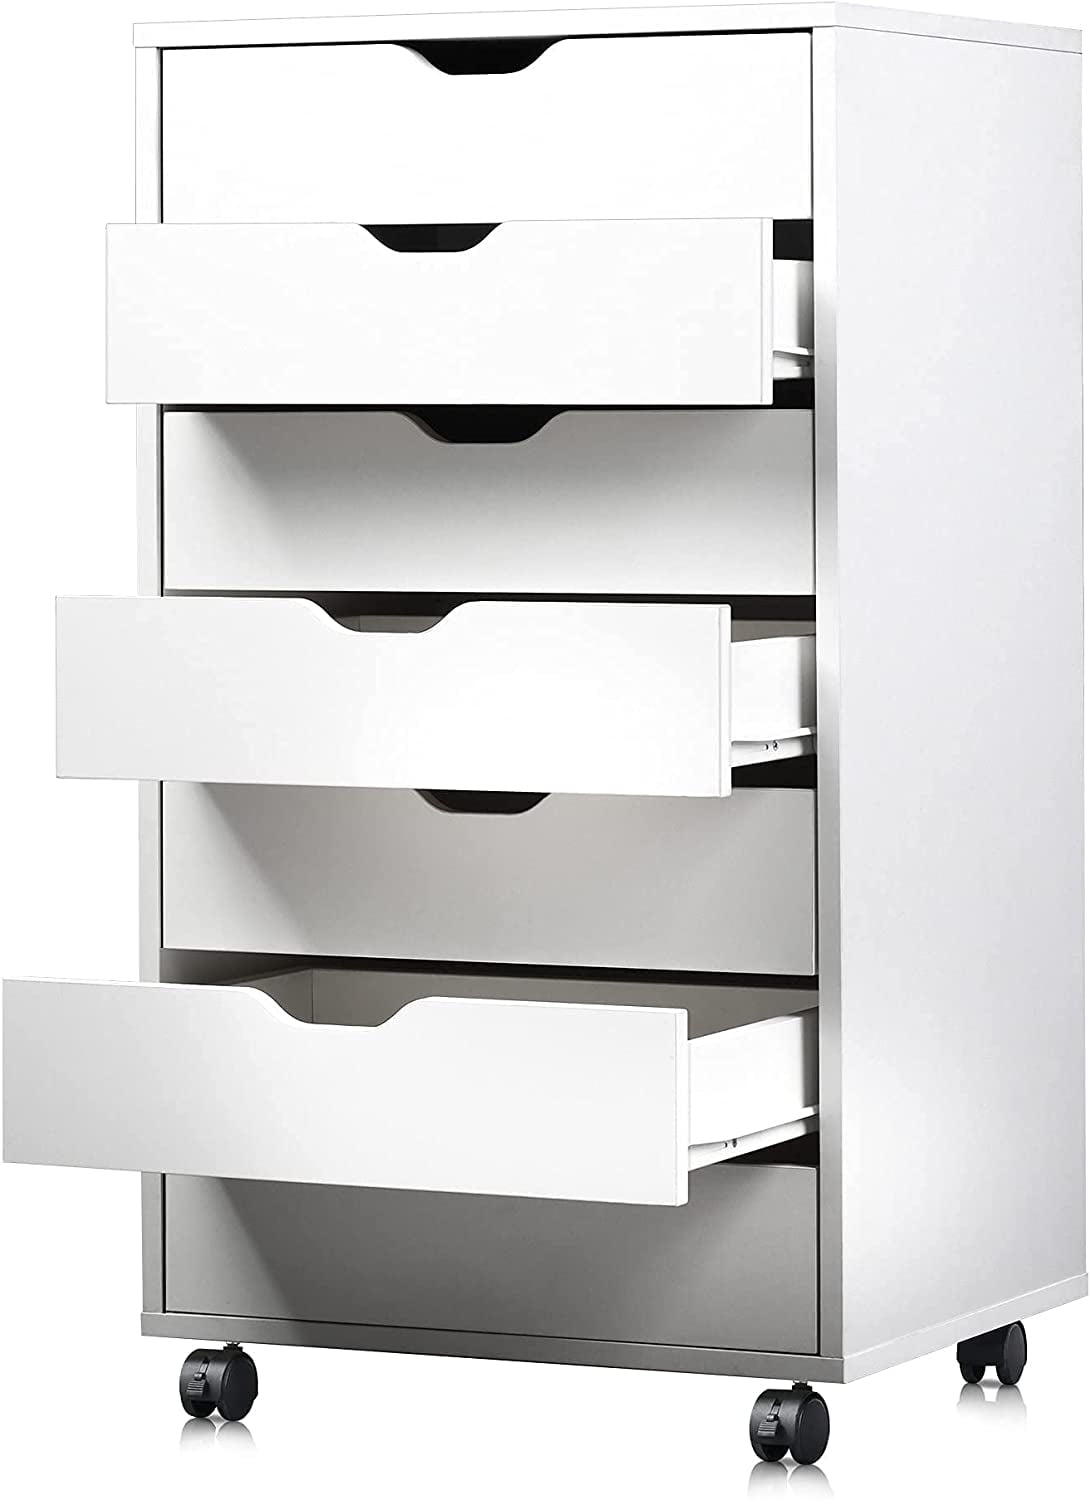 DEVAISE 7-Drawer Mobile Cabinet for Office & Closet in Black